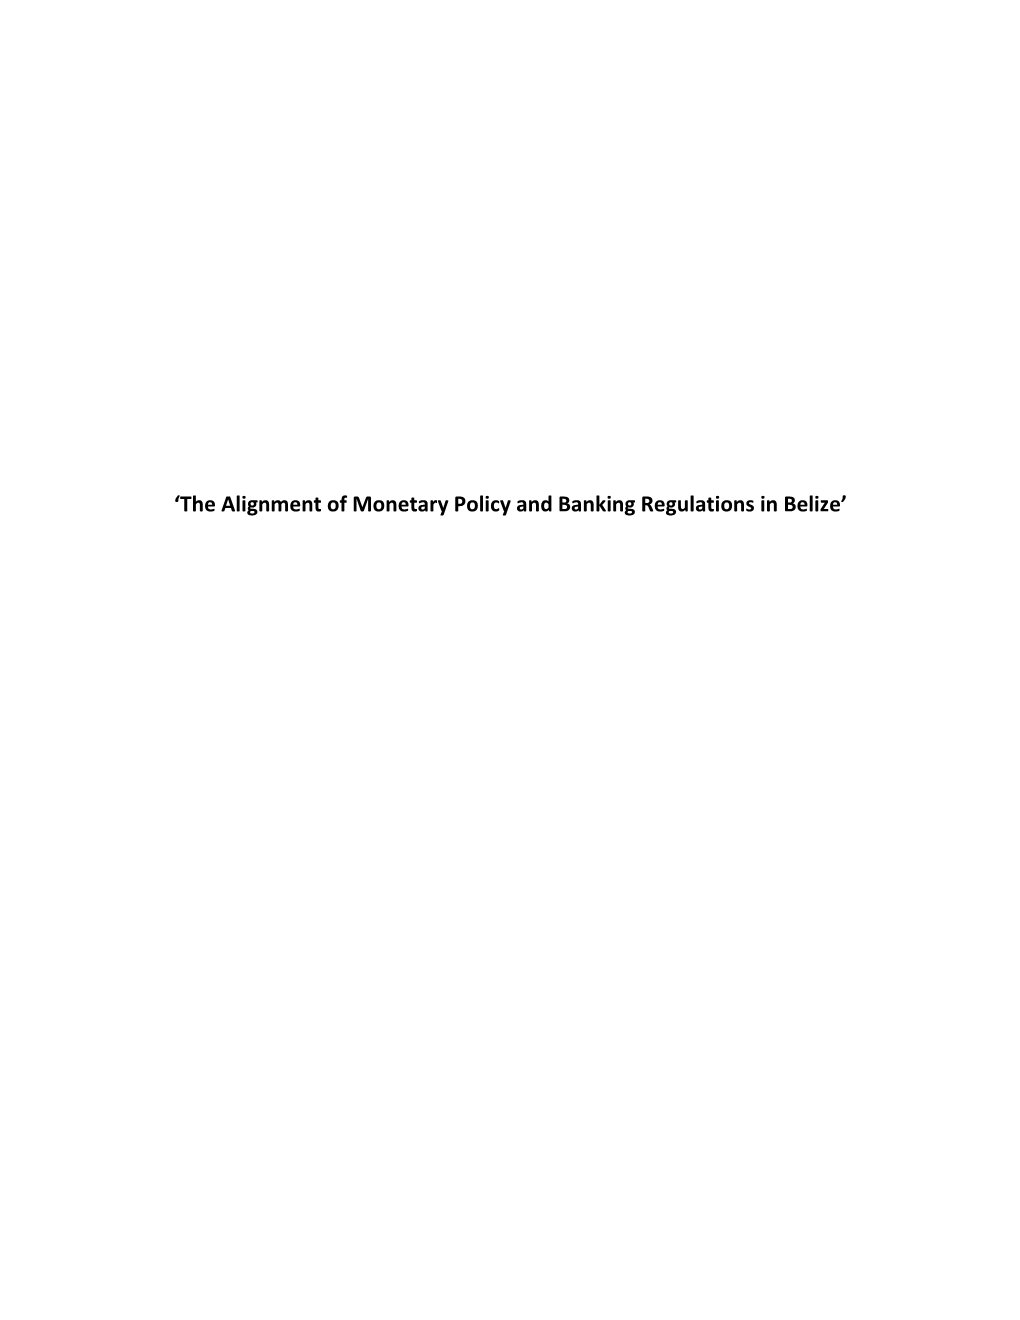 'The Alignment of Monetary Policy and Banking Regulations in Belize'